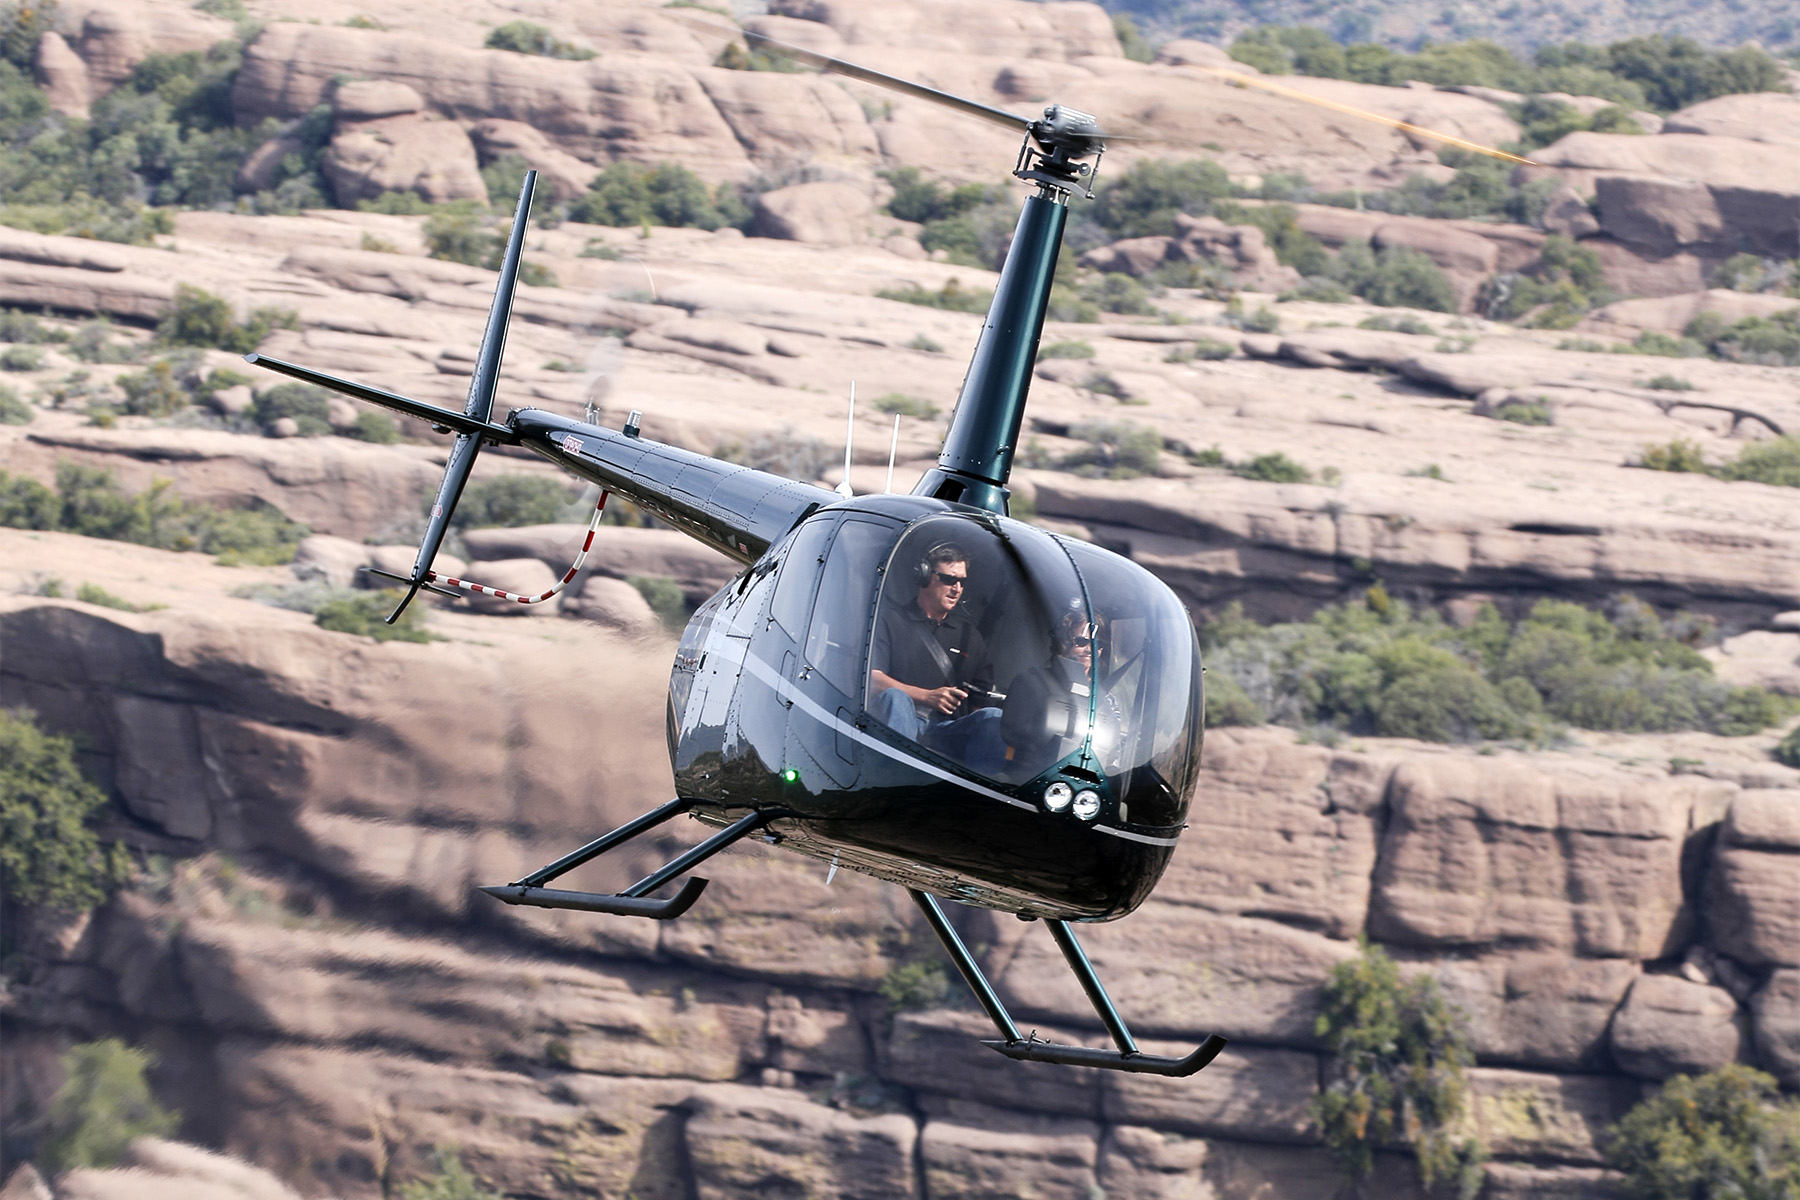 Donaldson is commemorating the delivery of its 9,000th IBF at Heli-Expo 2018 in Las Vegas, Nevada. Donaldson Photo